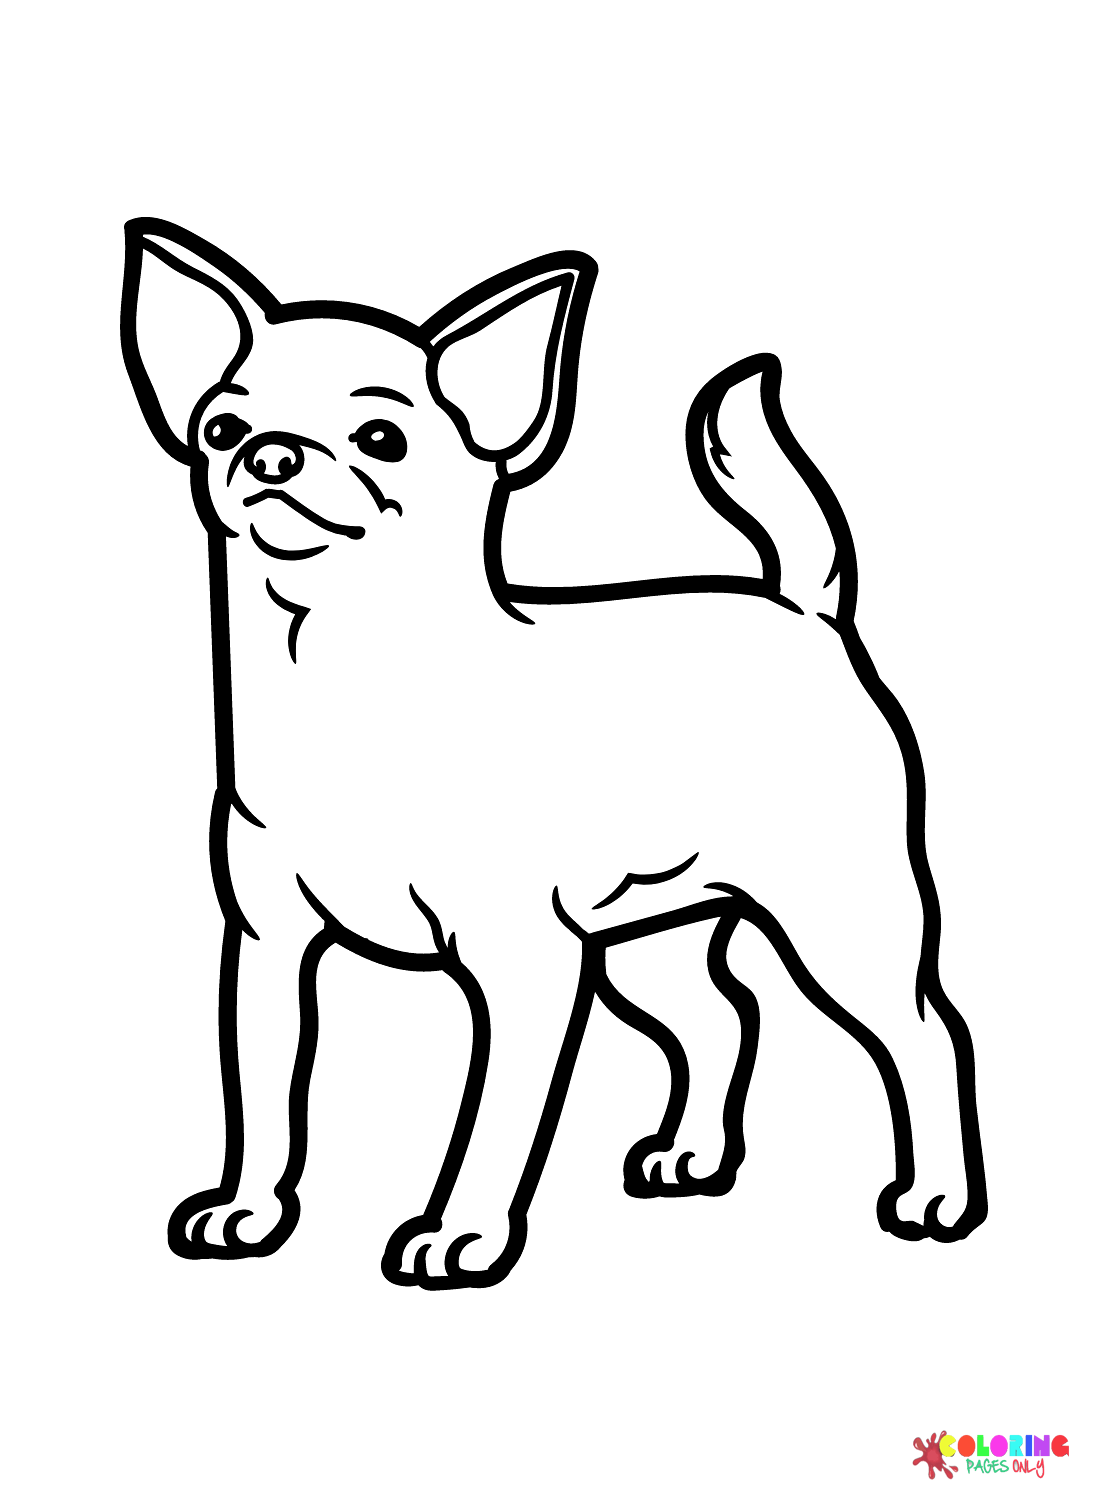 Chihuahua Dog Coloring Page - Free Printable Coloring Pages